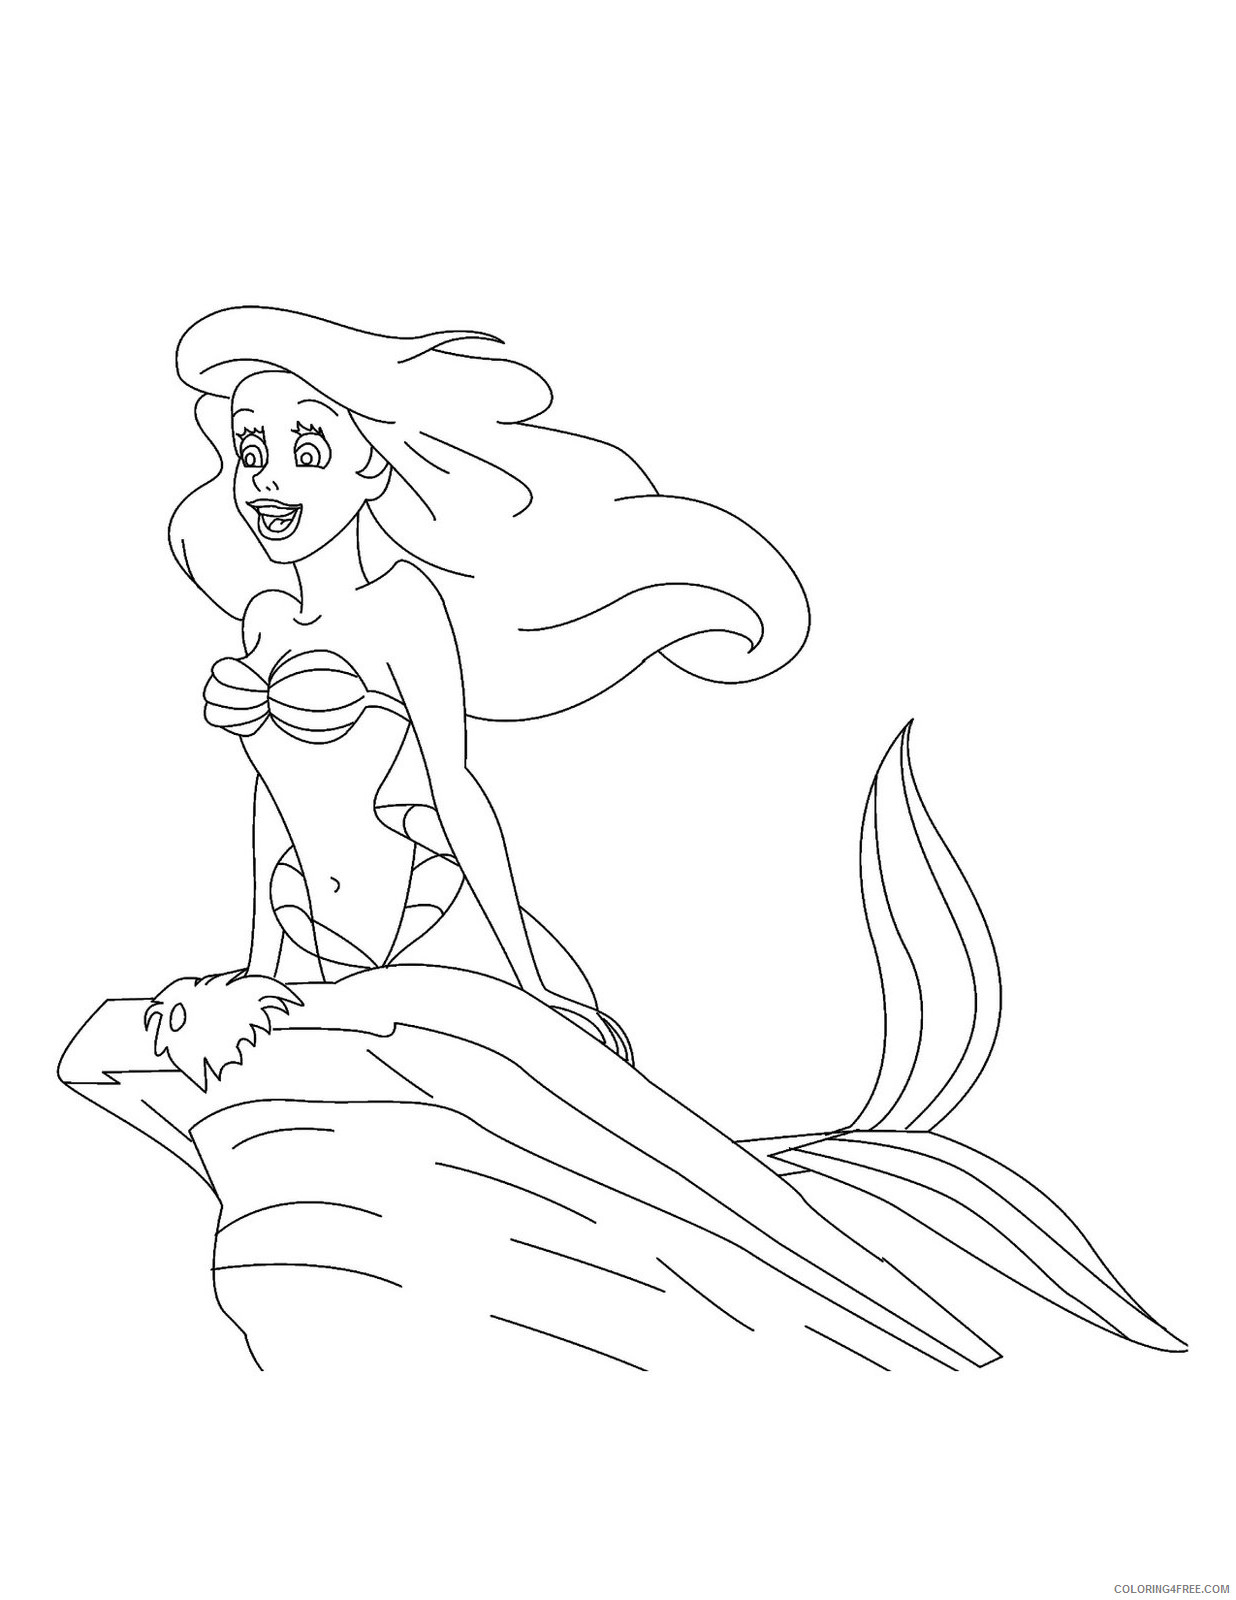 The Little Mermaid Coloring Pages Cartoons The Little Mermaid For Kids Printable 2020 6454 Coloring4free